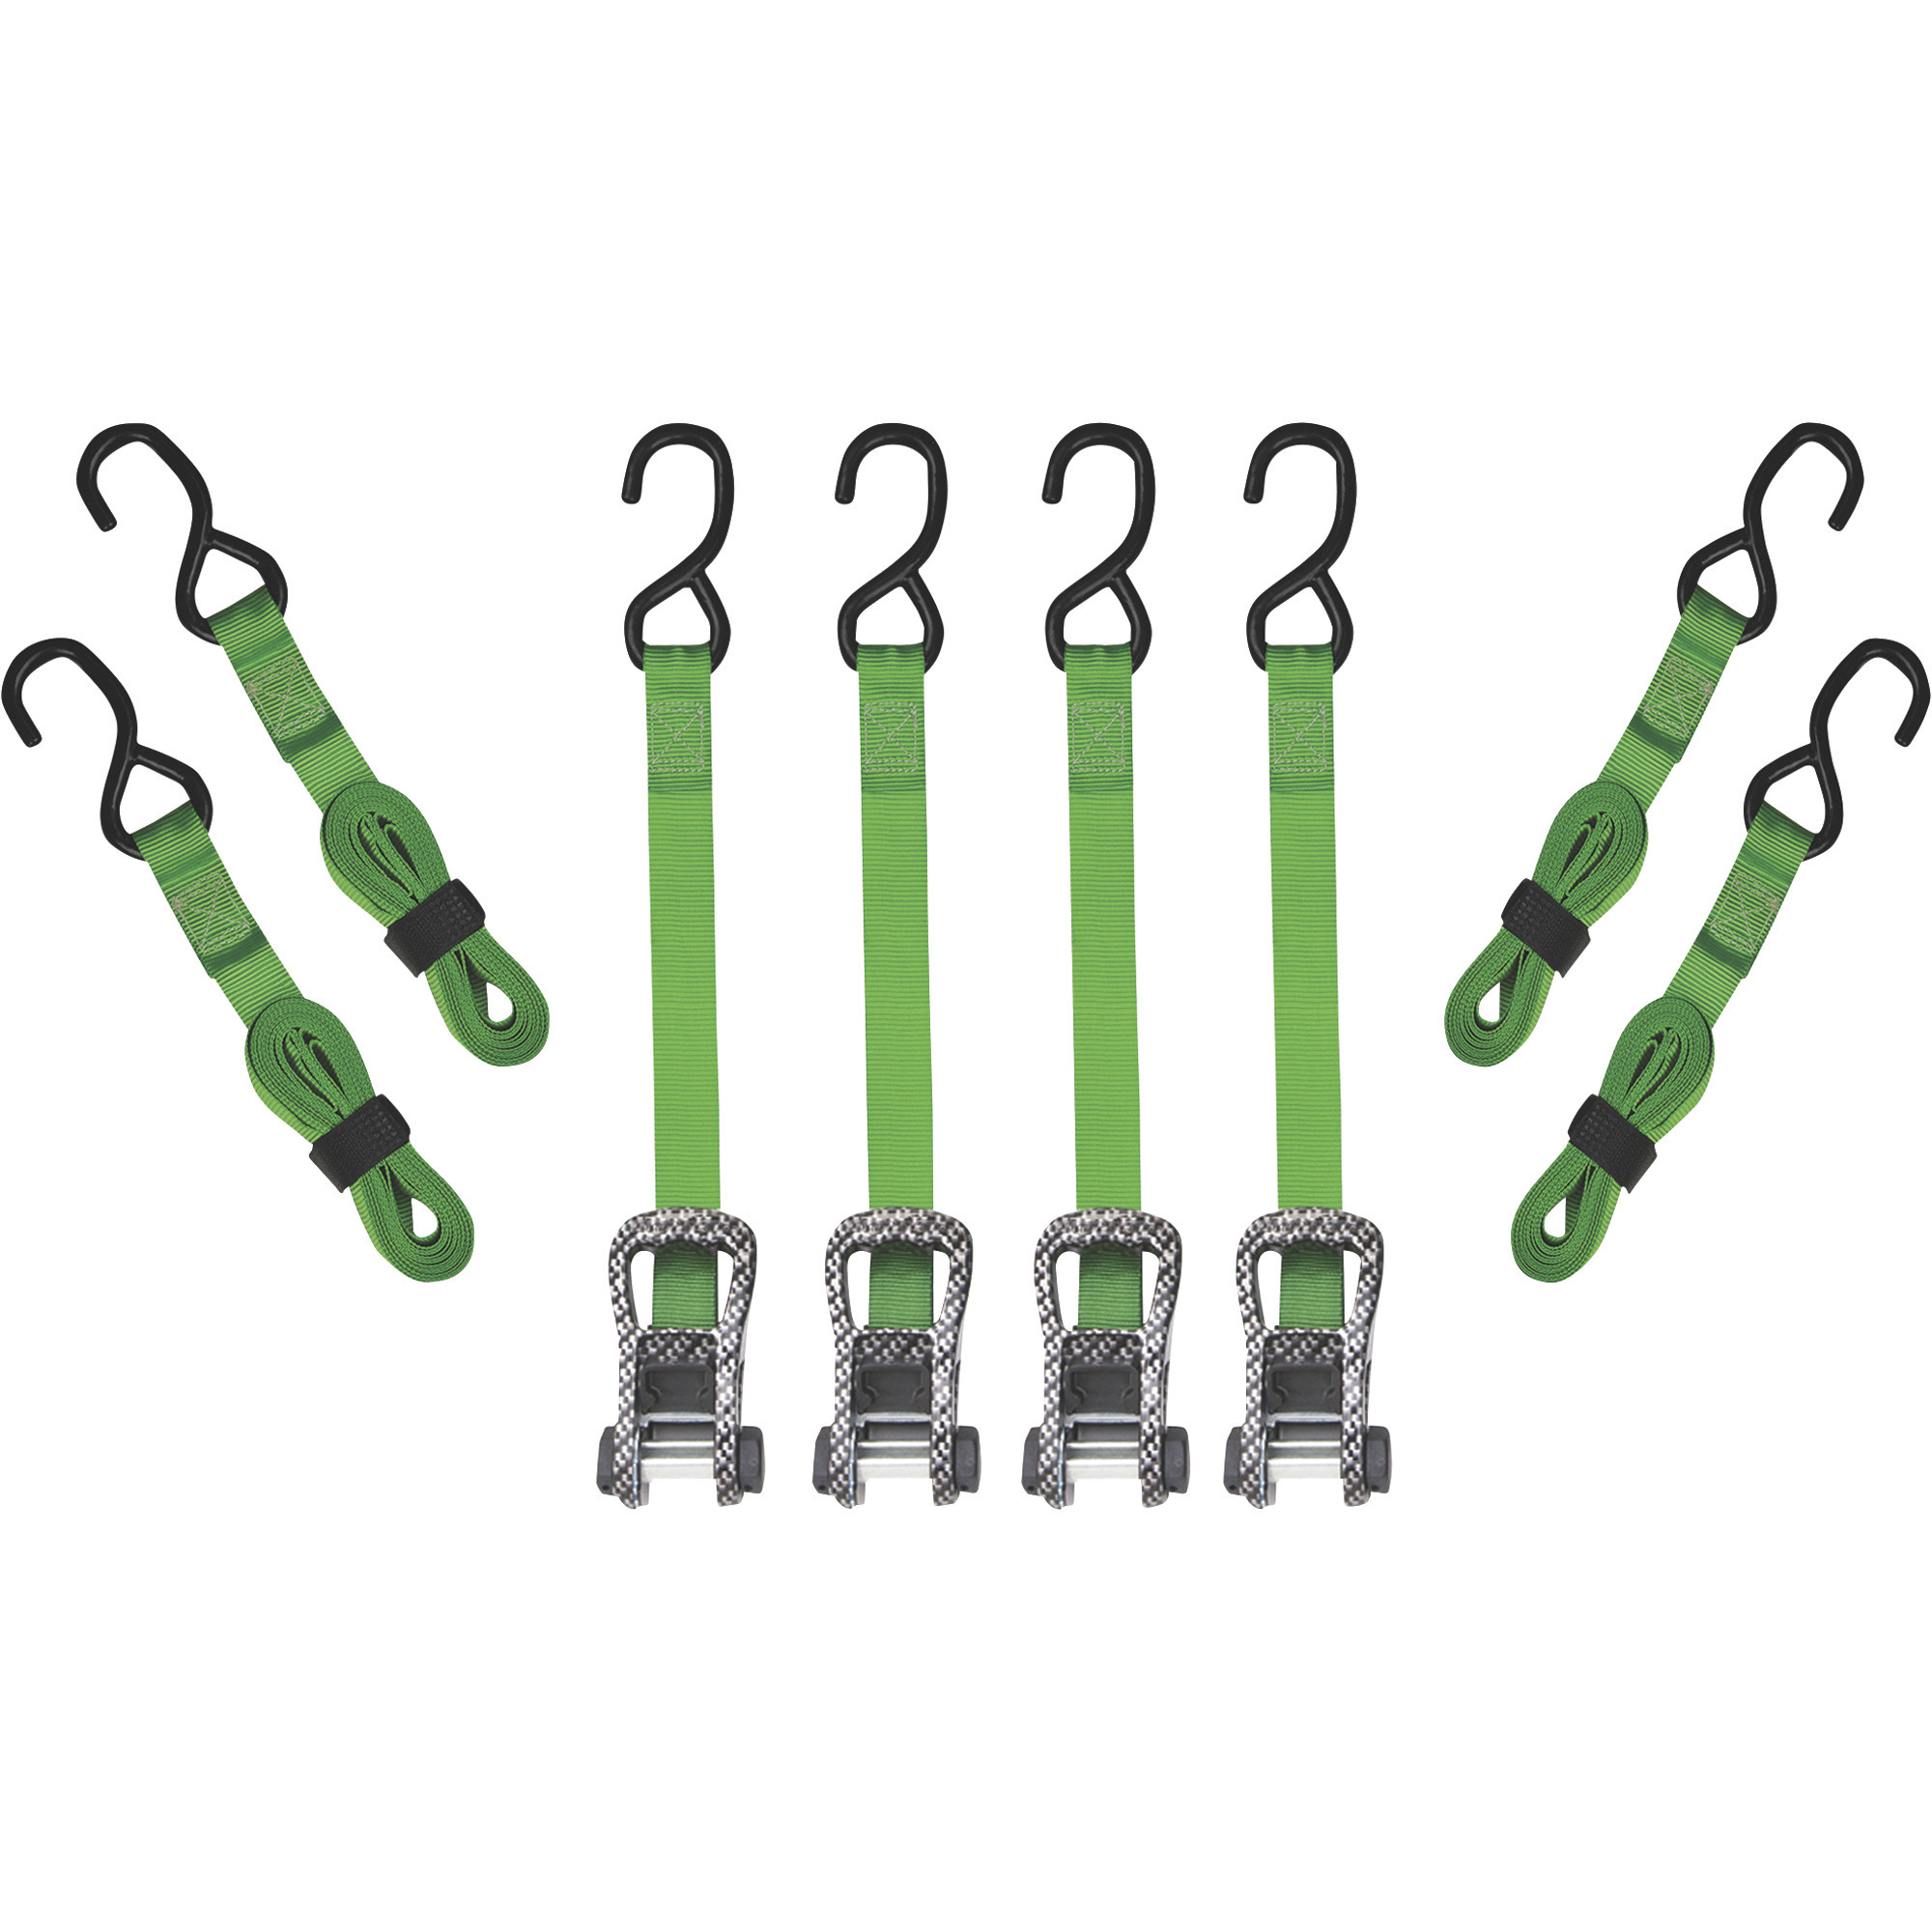 SmartStraps CarbonX Premium Ratchet Tie-Down Strap, 4-Pack, 1Inch x 20ft., with J-Hook, 1500-Lb. Breaking Strength, Green, Model 4570